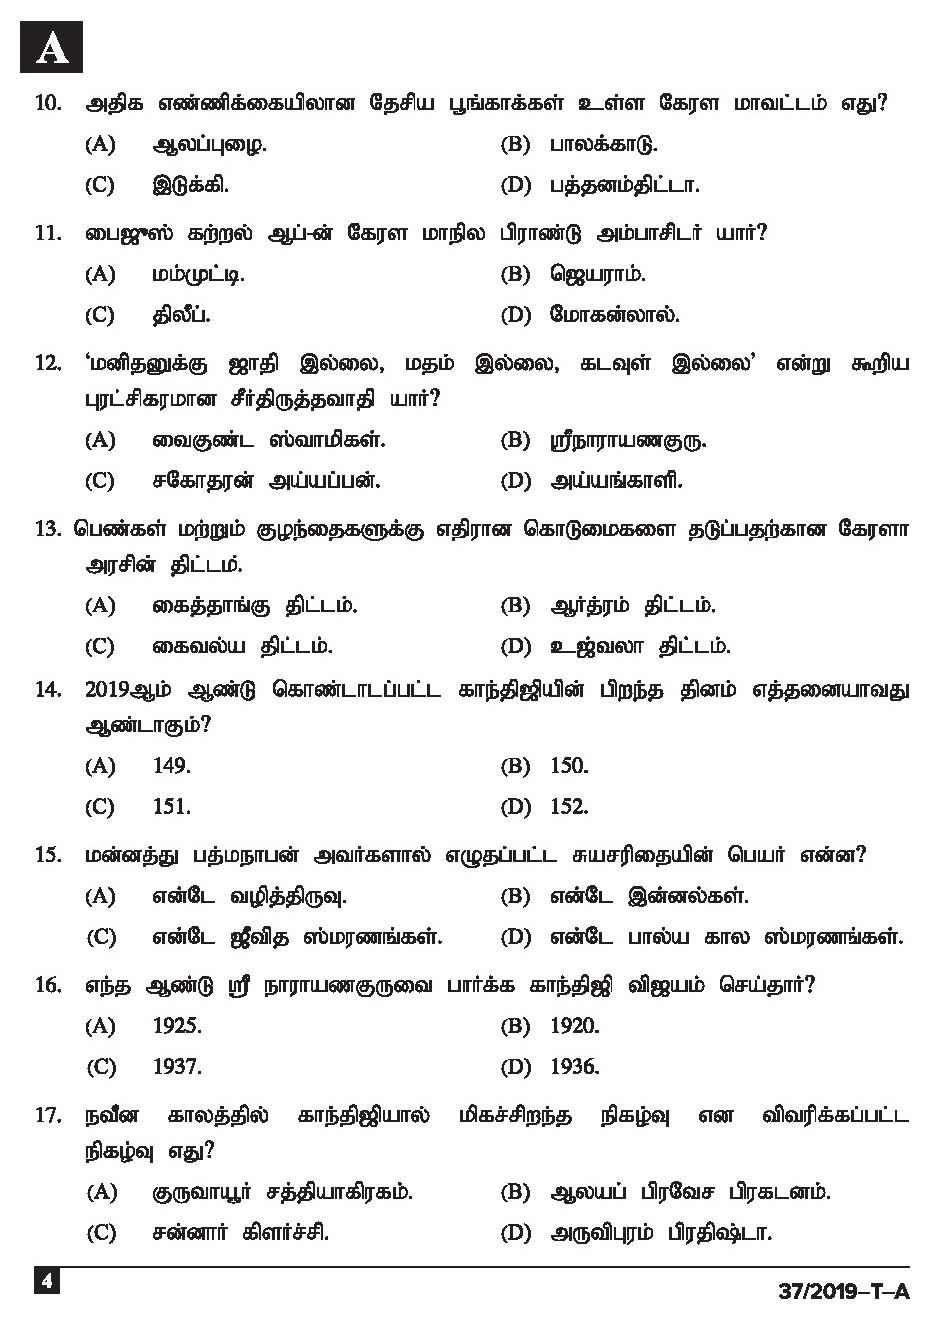 KPSC Driver and Office Attendant Tamil Exam 2019 Code 372019 T 3